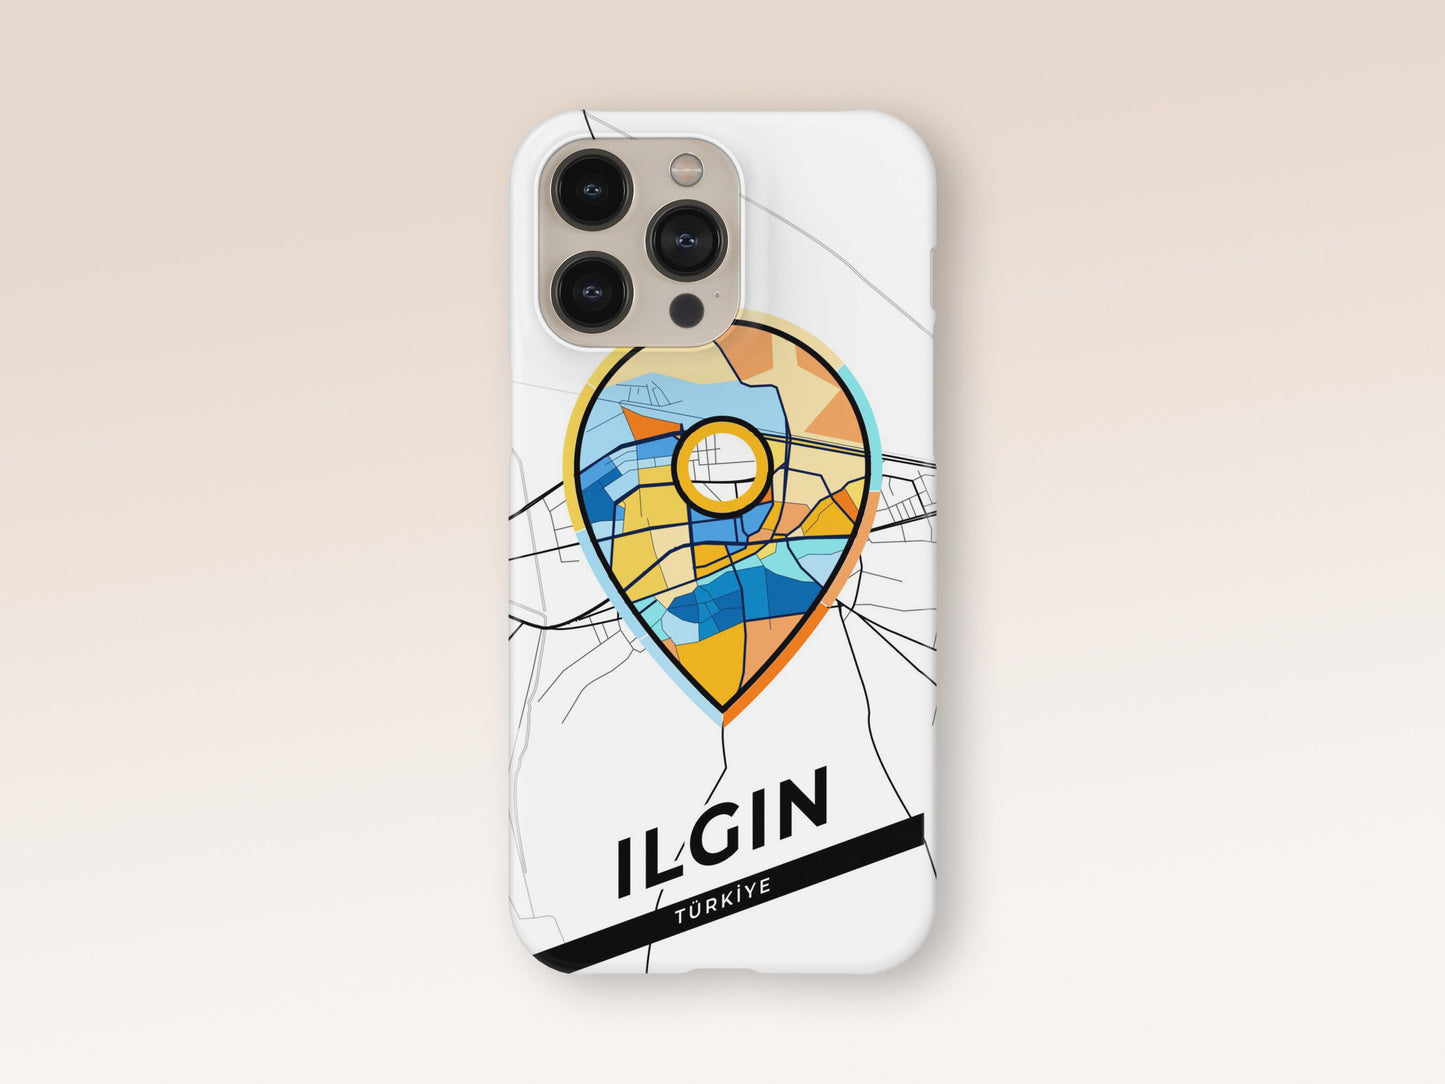 Ilgın Turkey slim phone case with colorful icon. Birthday, wedding or housewarming gift. Couple match cases. 1